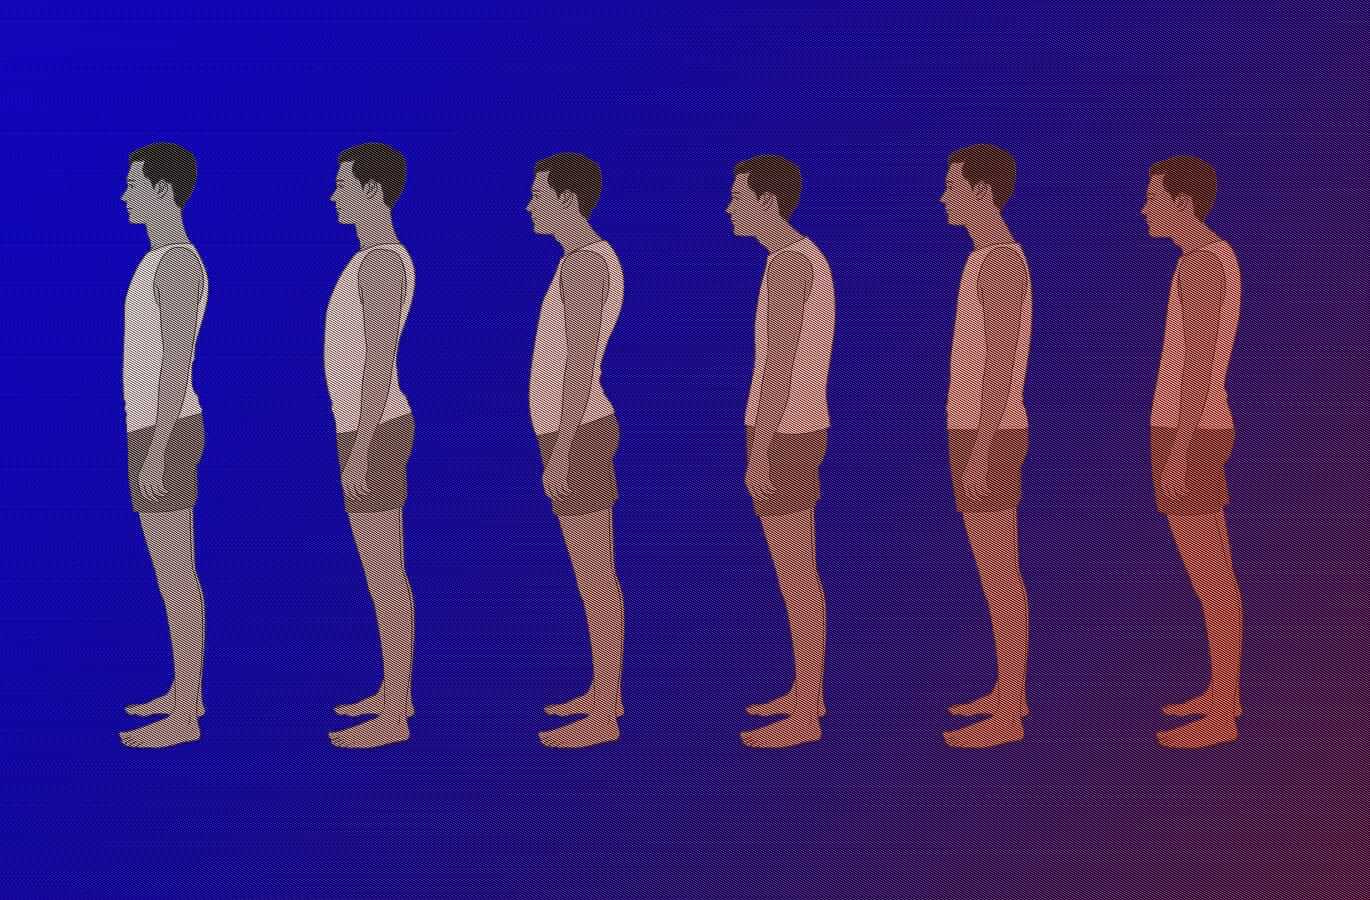 Straighten out your posture